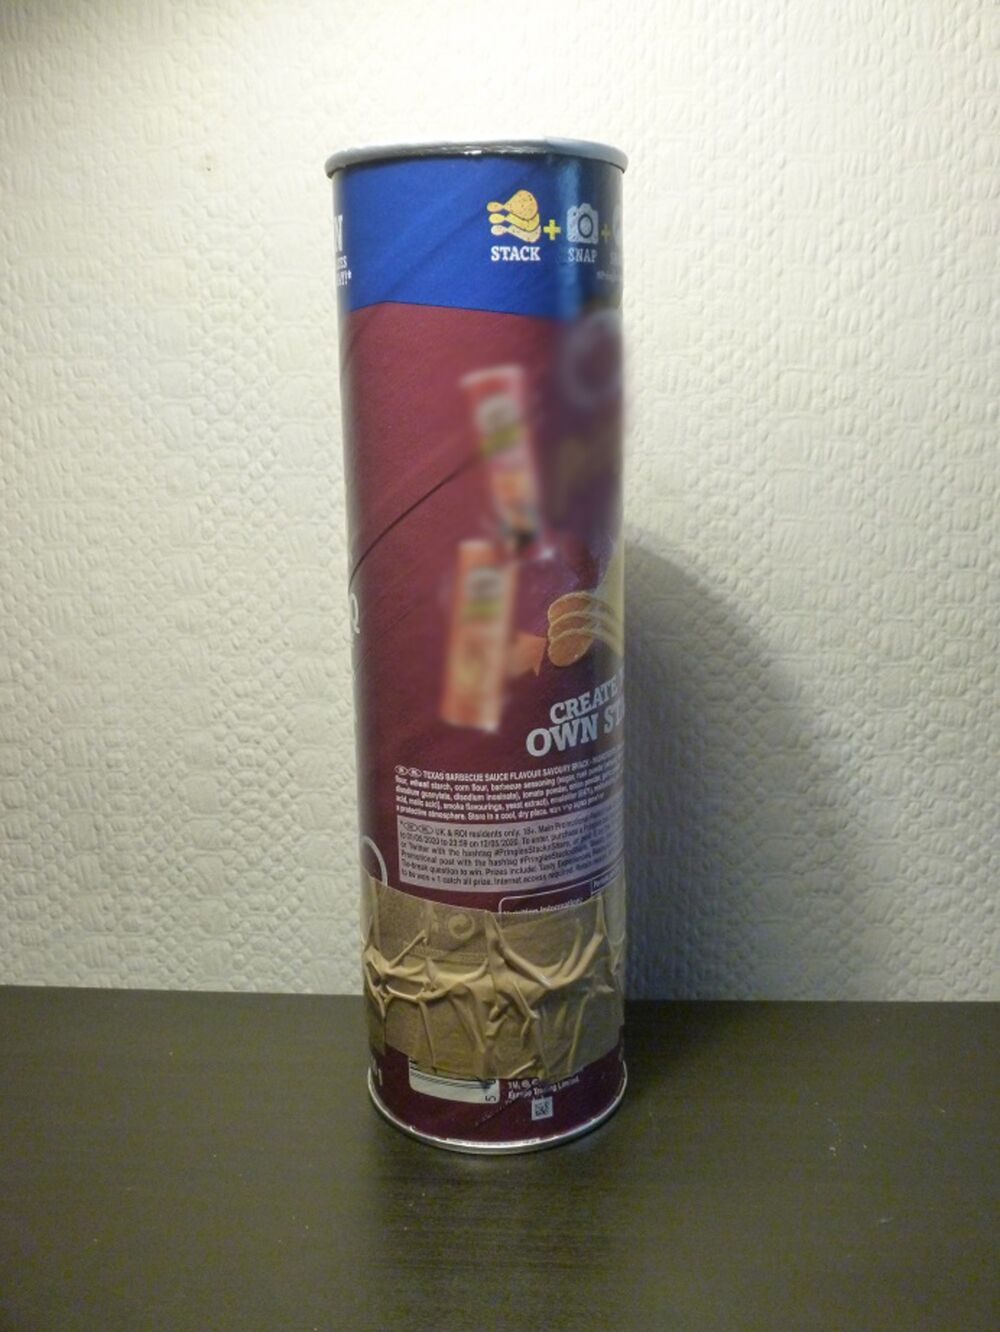 A Pringles tube cut into two pieces and taped back together, on a black table.